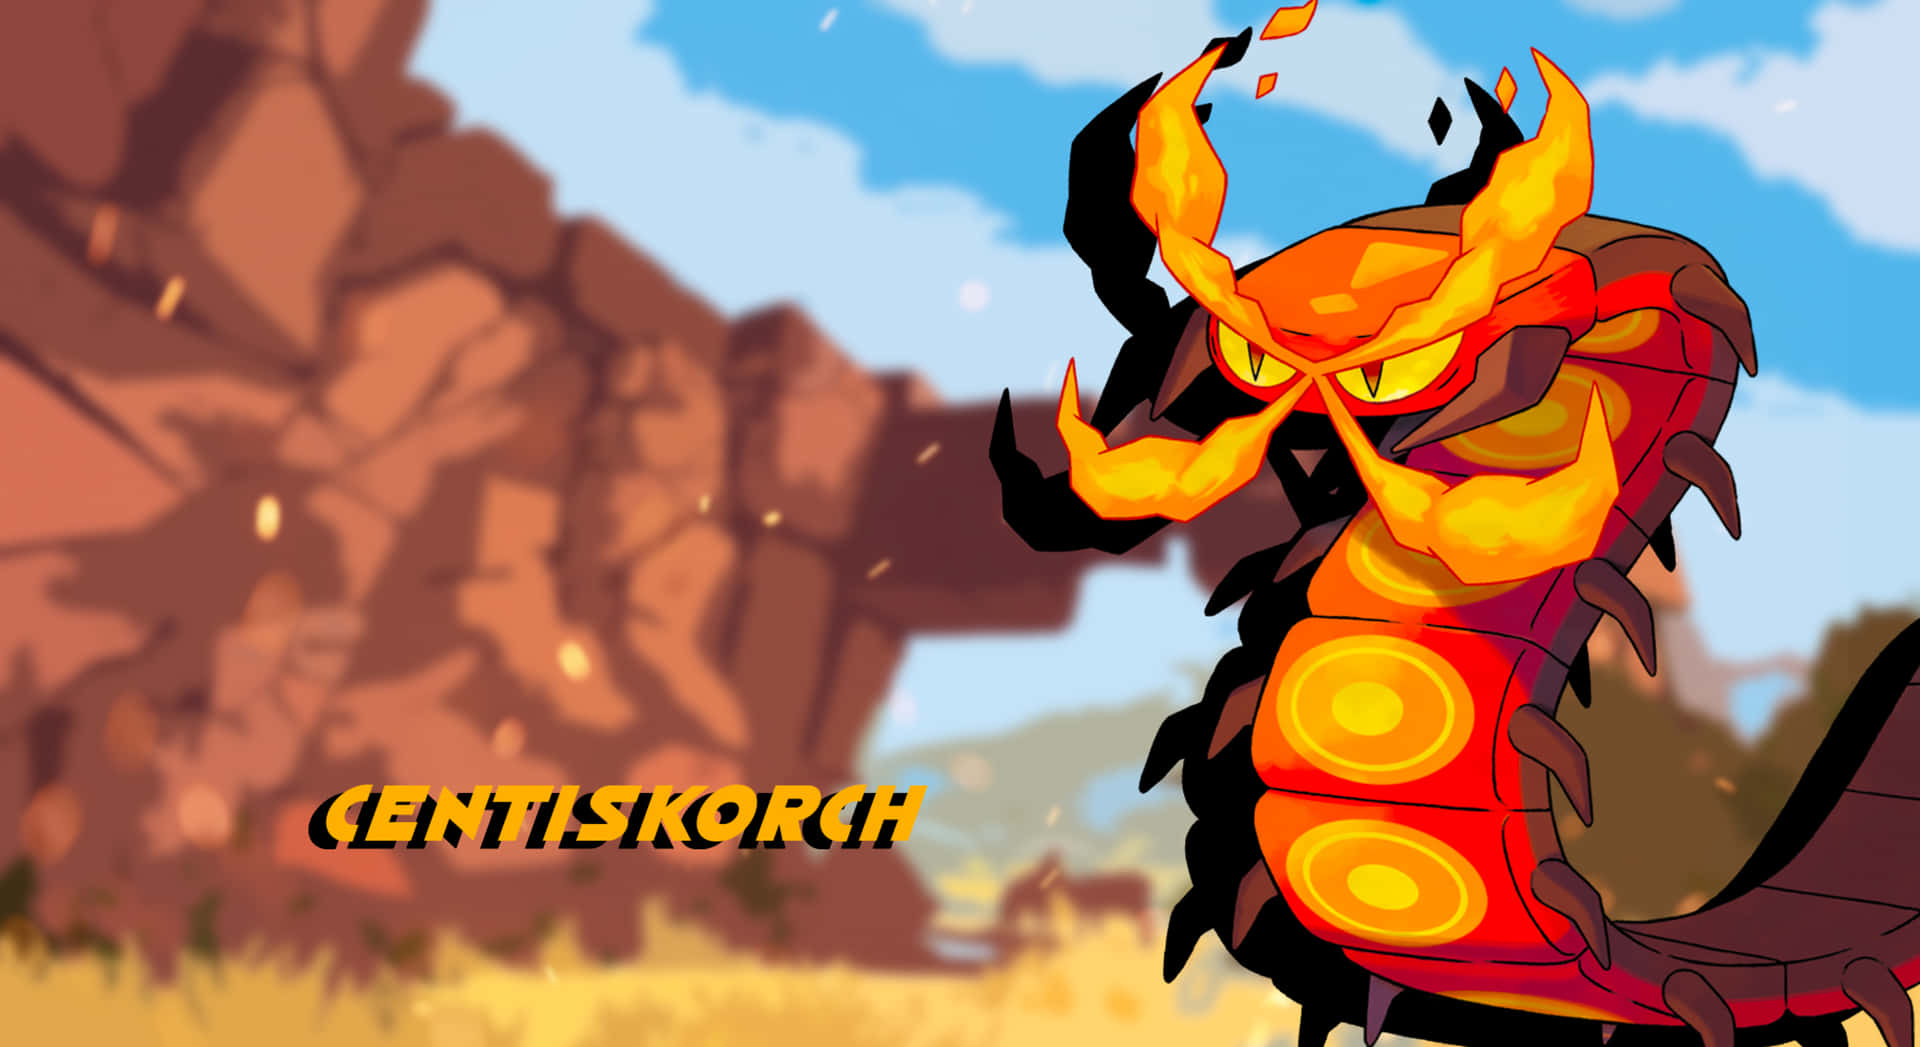 Centiskorch With Name On Blurry Backdrop Wallpaper